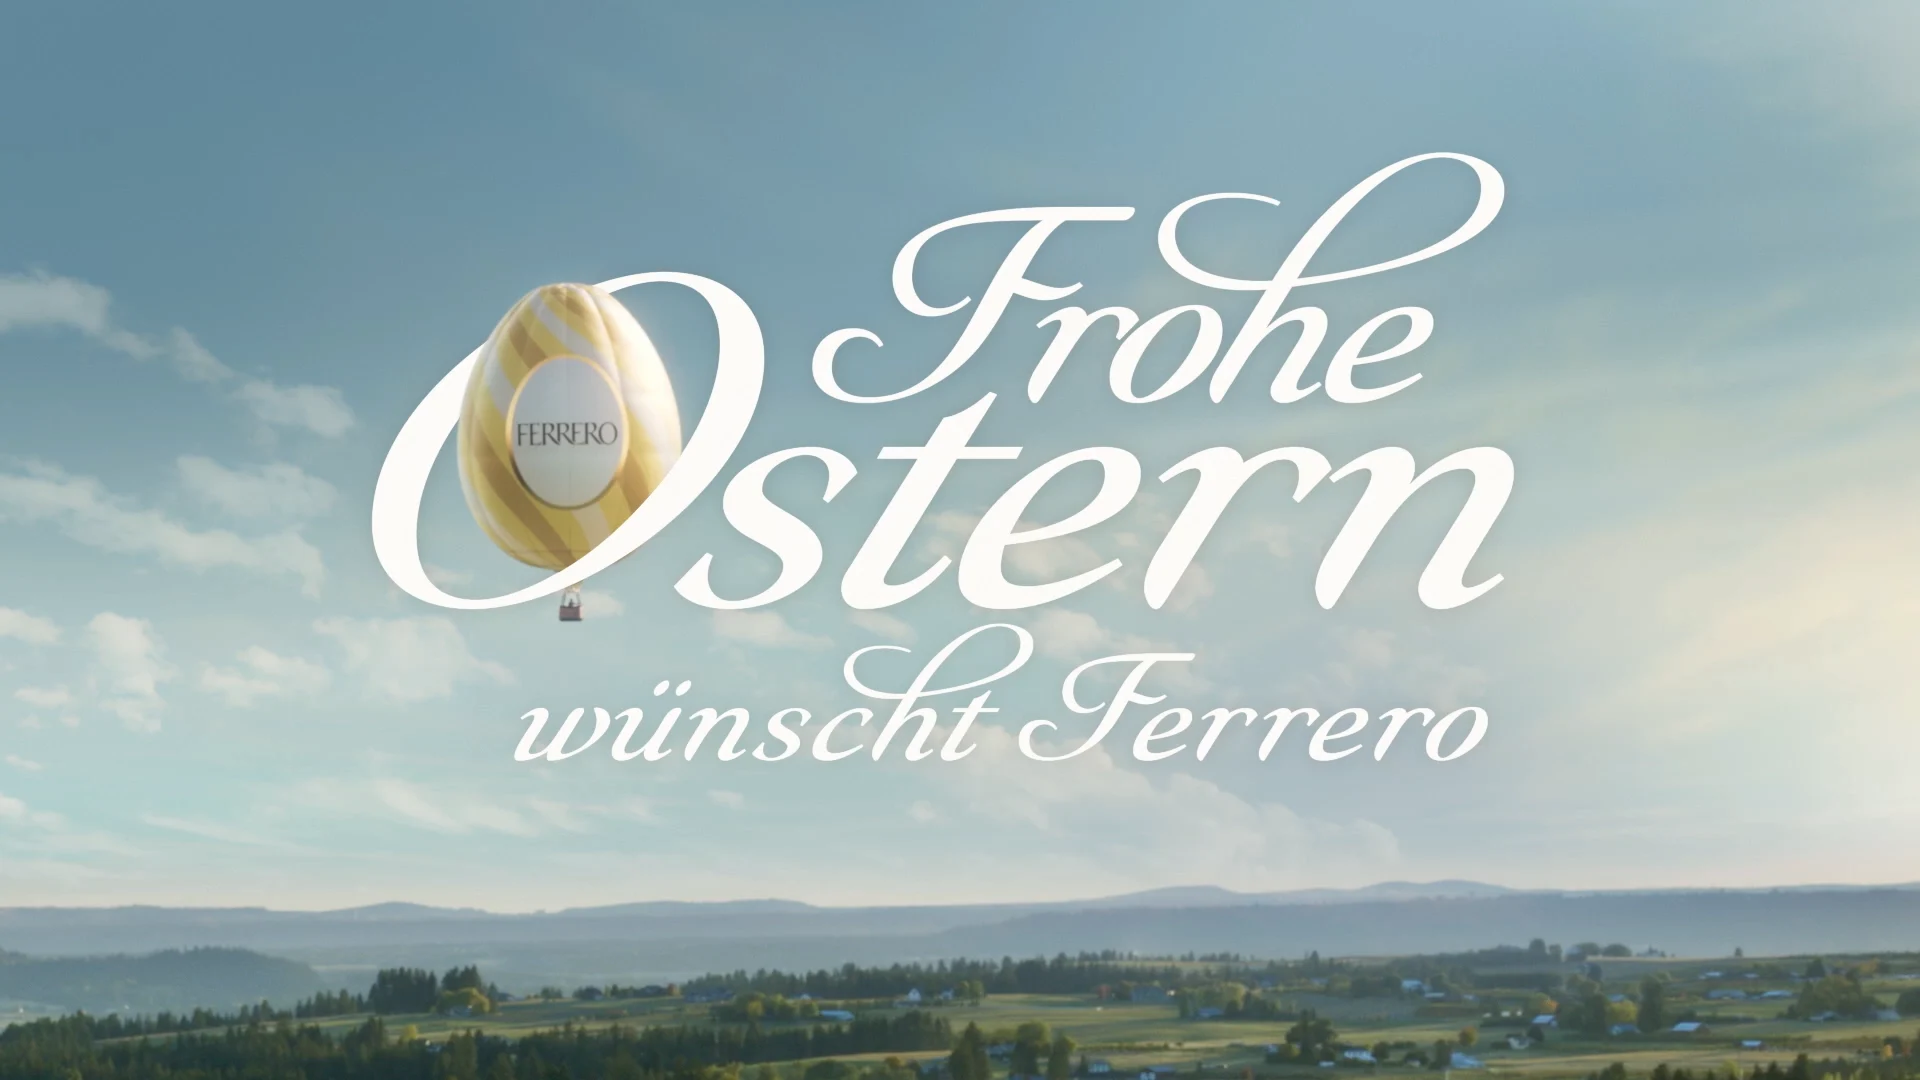 The Claim FROHE OSTERN WÜNSCHT IHNEN FERRERO is written into the sky above a green landscape. A hot air ballon shaped like an Easter egg is flying in the letter O